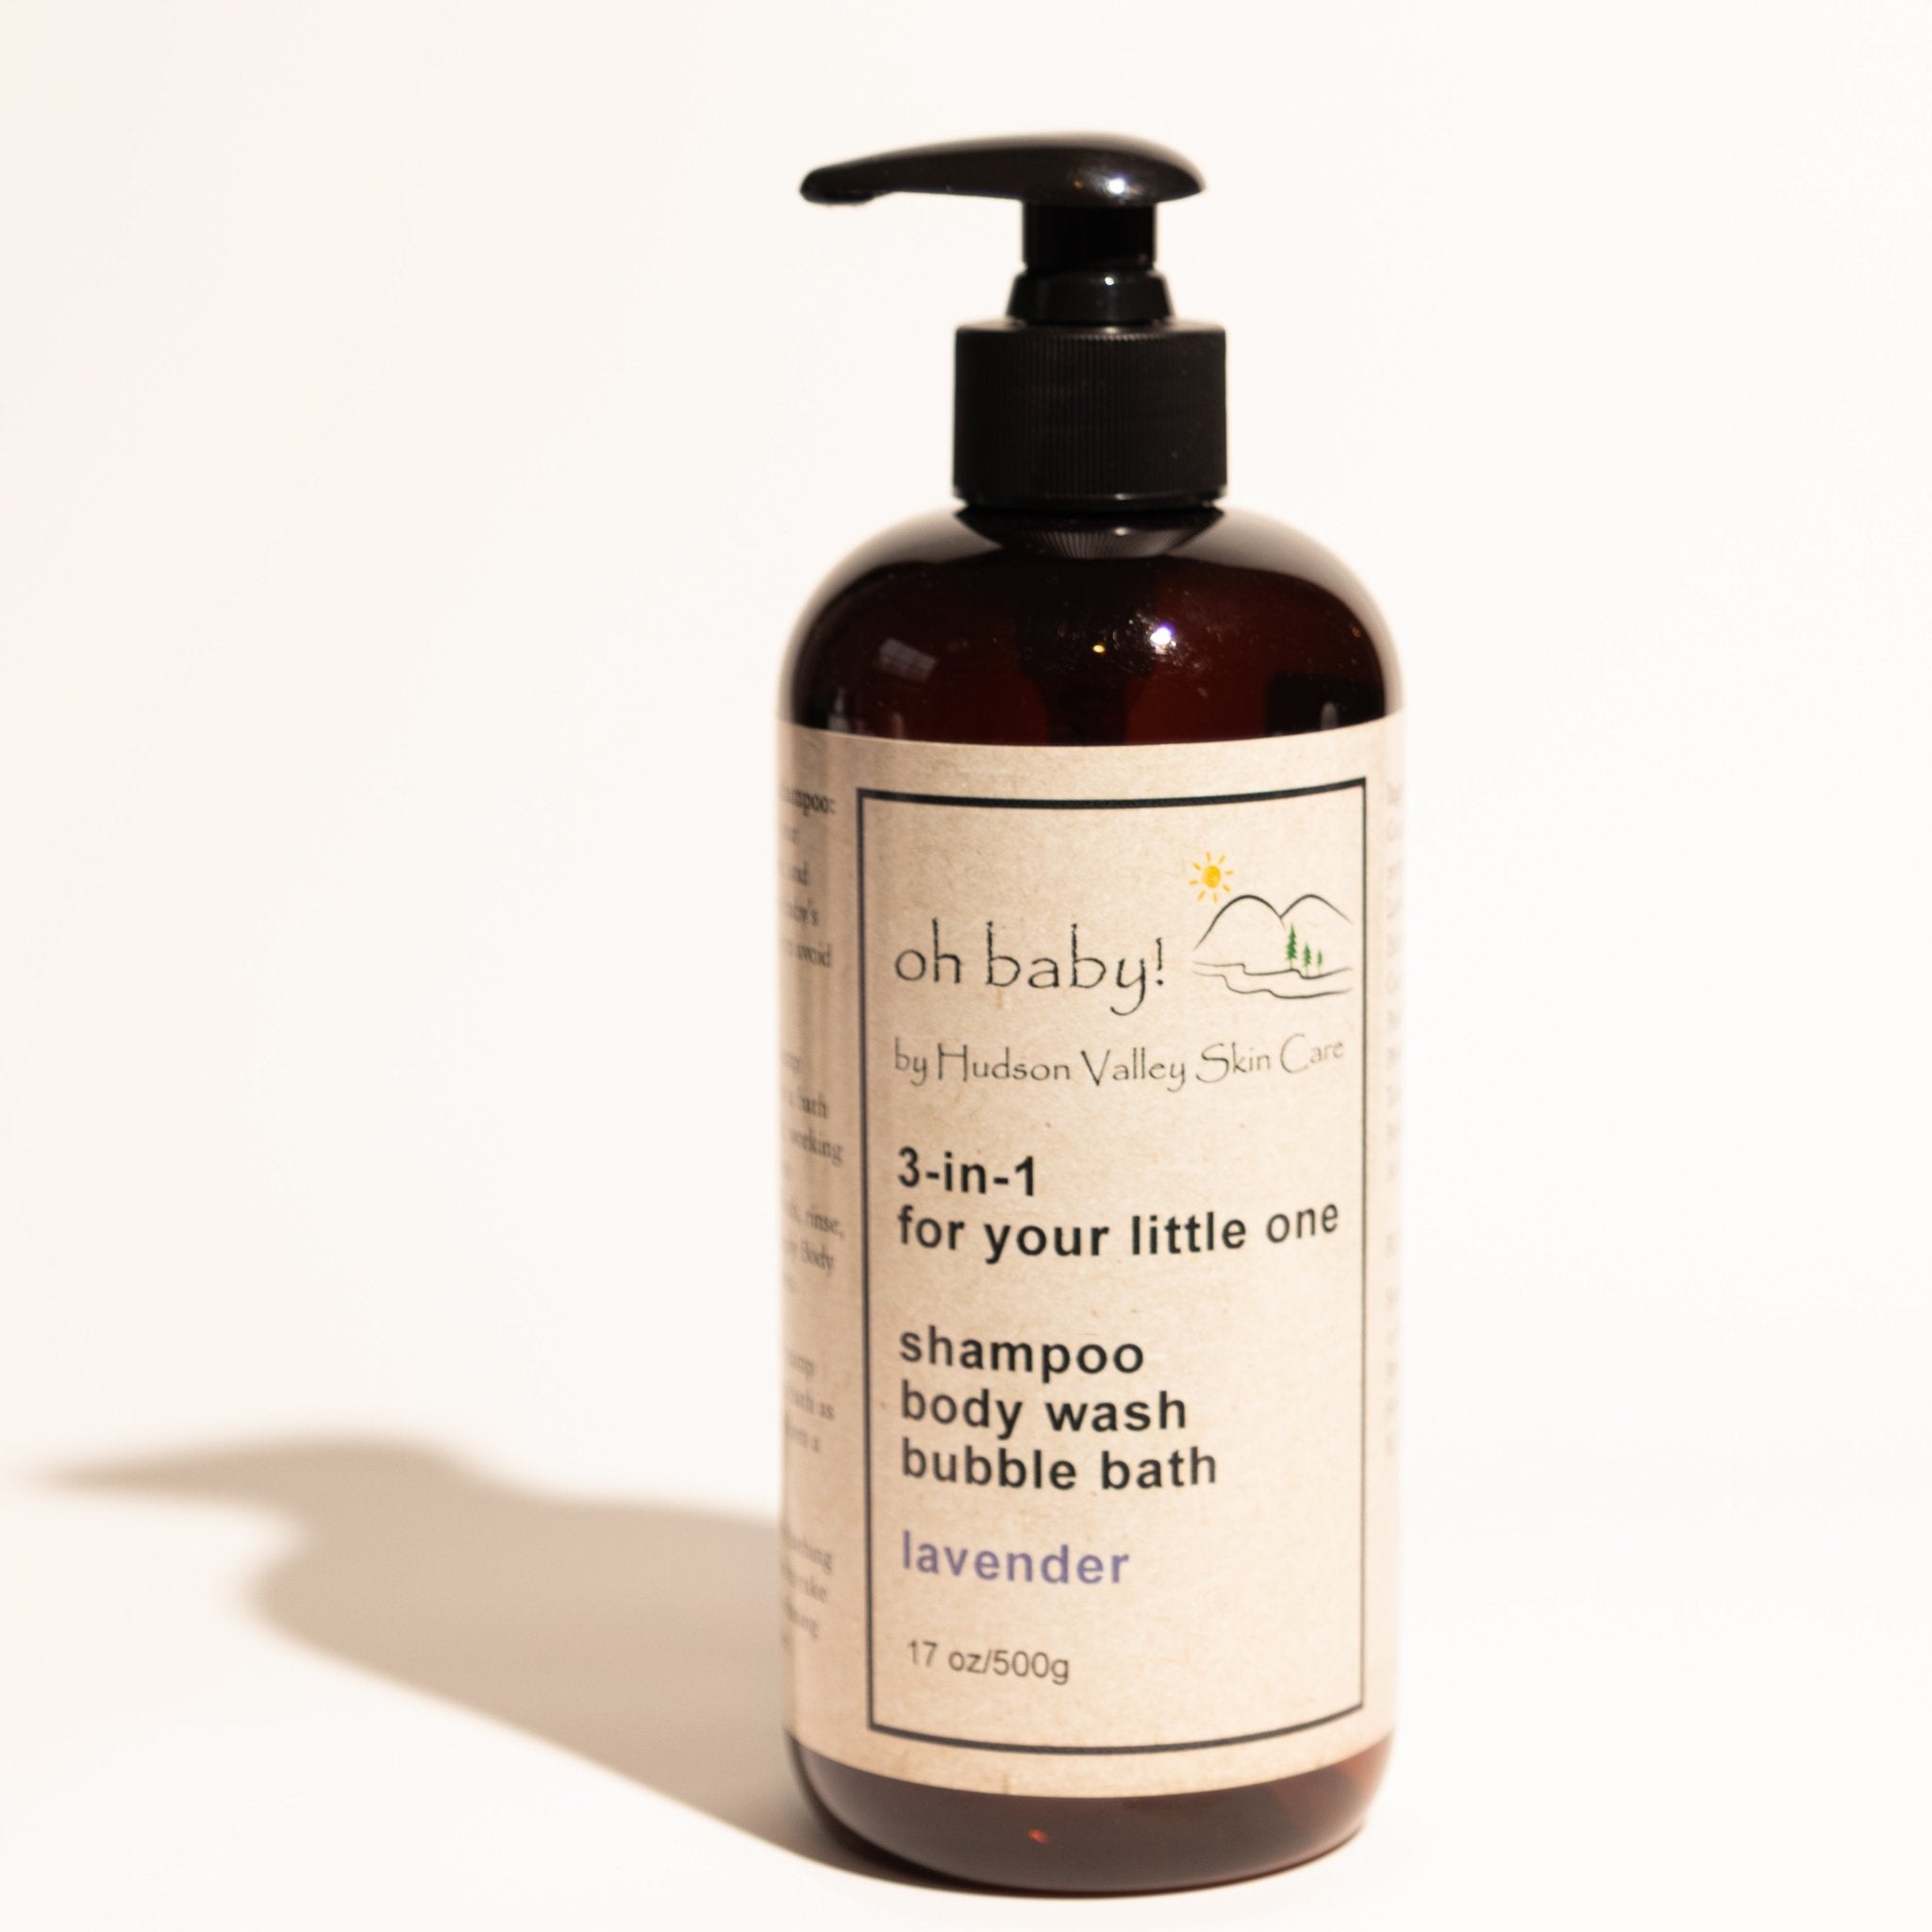 Oh Baby! 3-in-1 Wash - Hudson Valley Skin Care